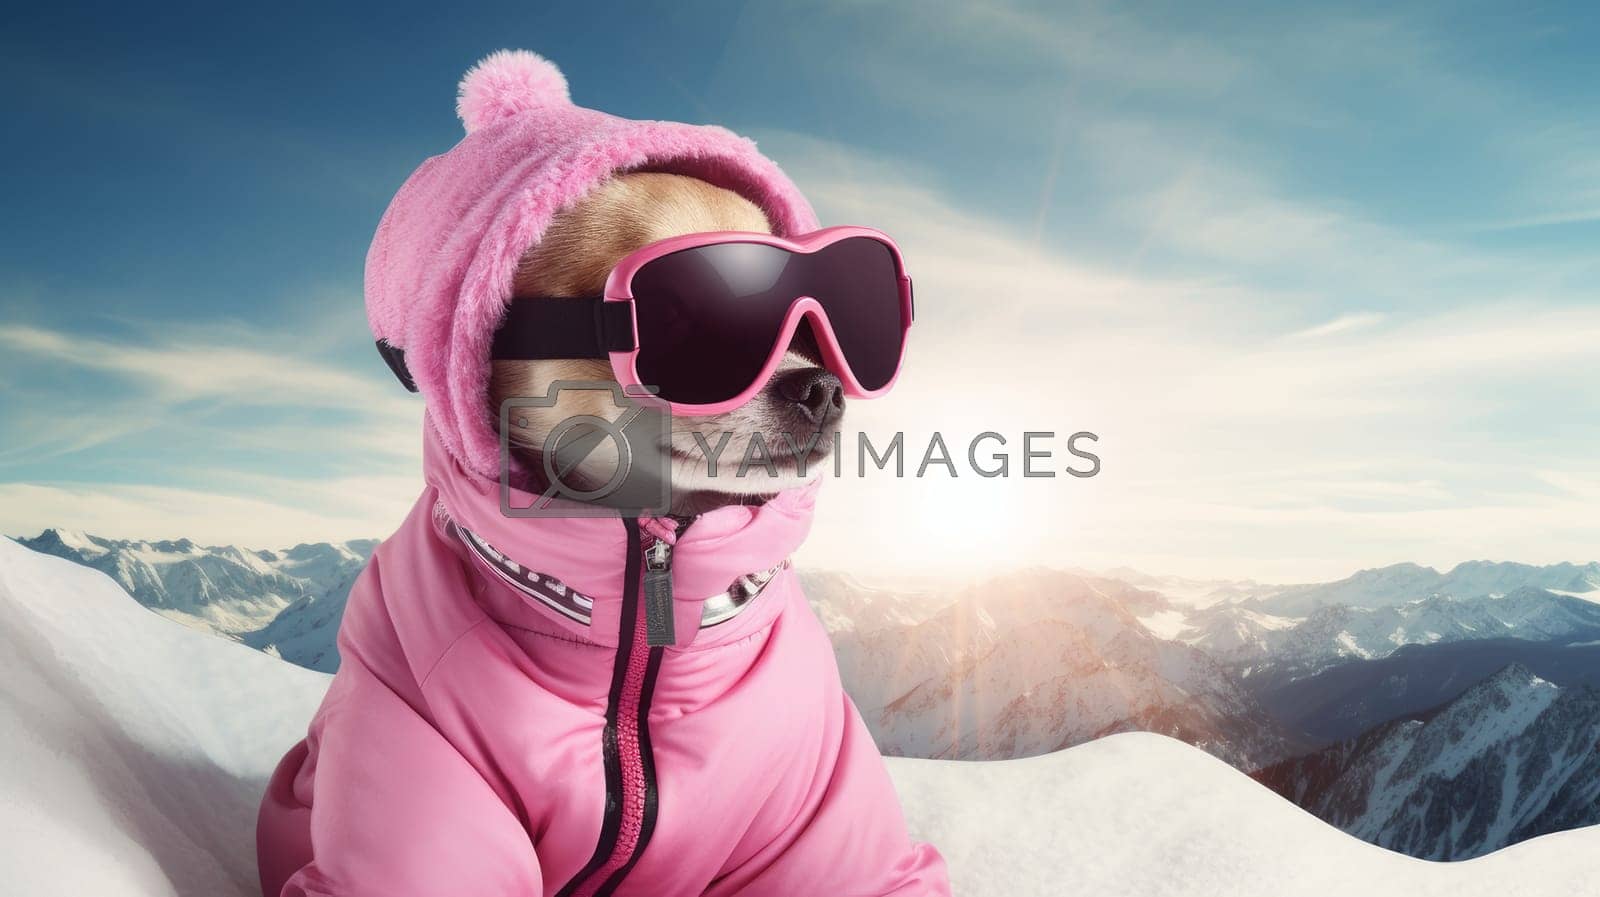 Royalty free image of A happy, active, small, cheerful dog in a pink jacket and glasses runs through the snow overlooking a snowy landscape of a forest and mountains, at a ski resort. by Alla_Yurtayeva